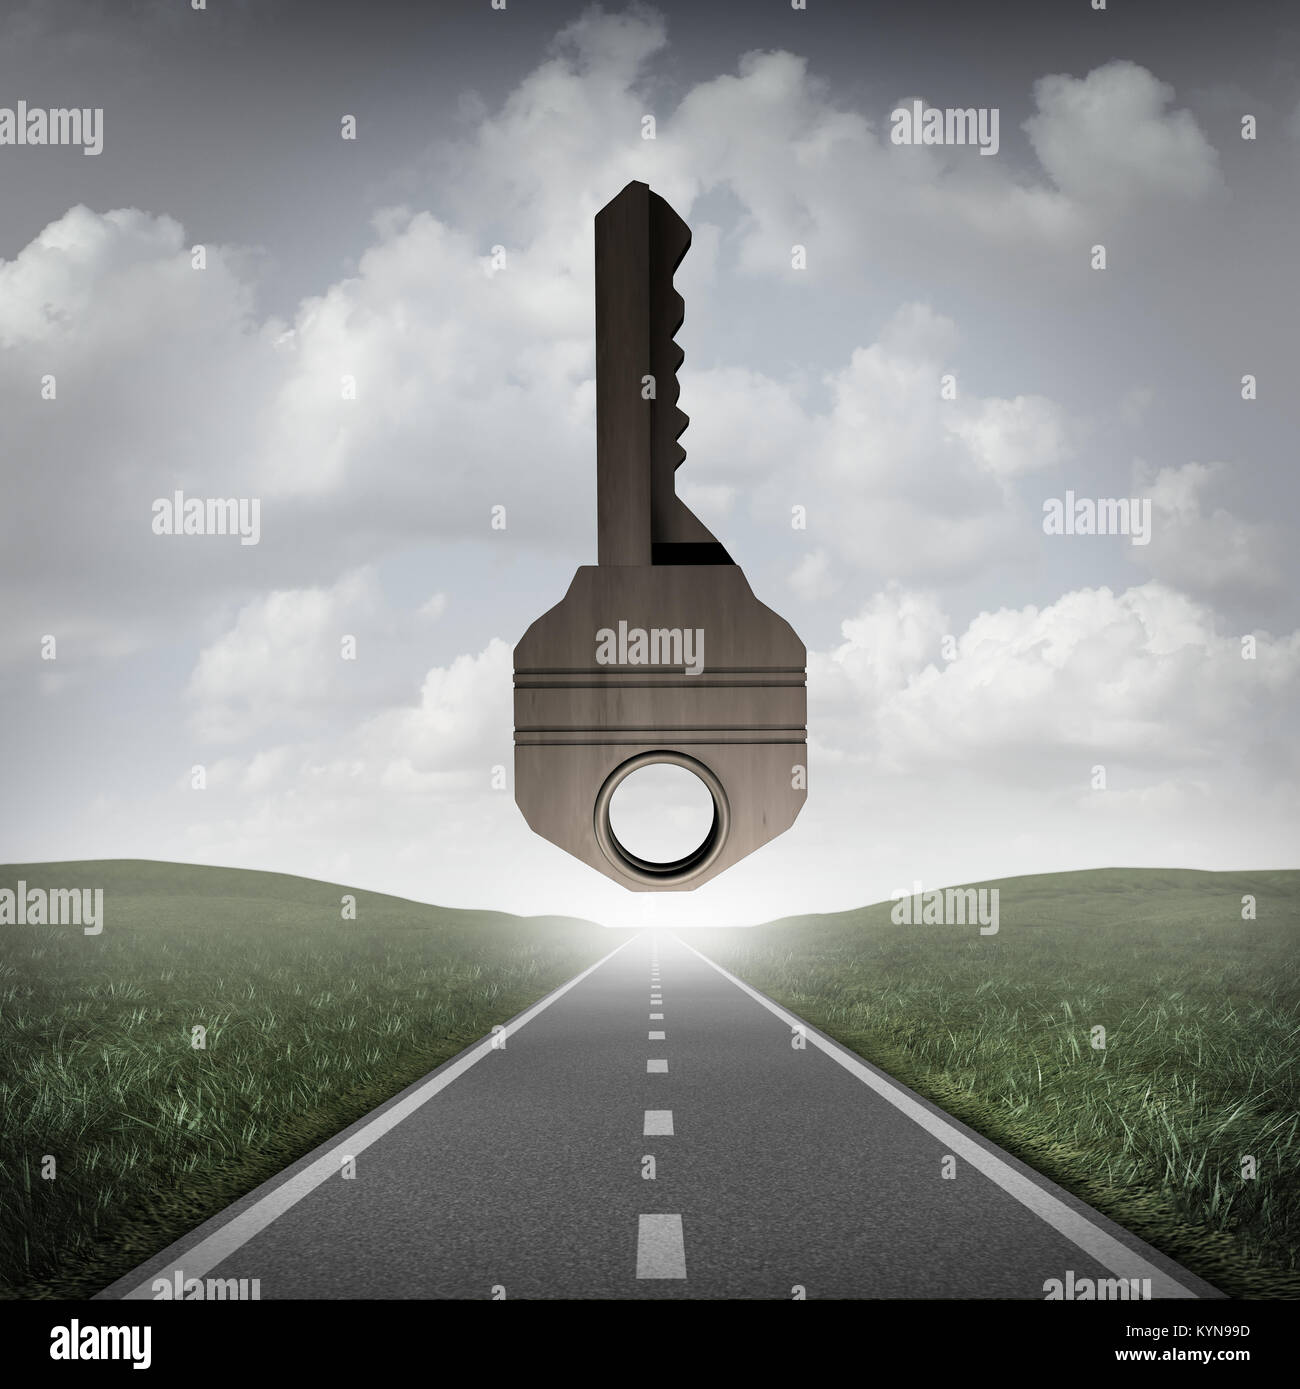 Road key to success concept as a path to succeed with a solution goal ahead as a surreal business or life metaphor for answers as a 3D illustration. Stock Photo